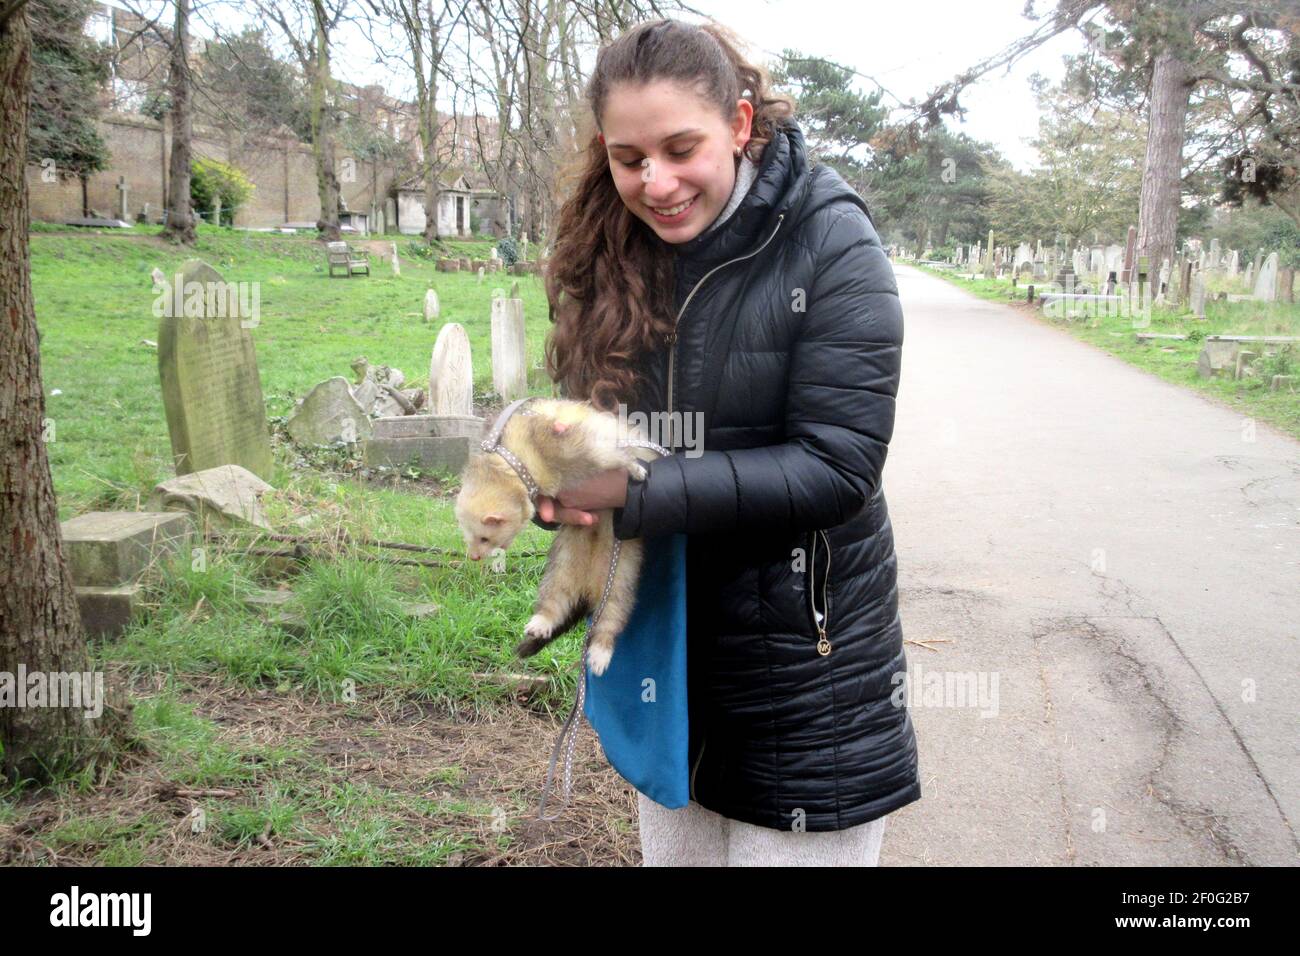 London, UK. 7th Mar, 2021. A woman takes her one year old ferret for a Sunday morning stroll in Brompton Cemetery, much to the consternation of local dogs. Credit: Brian Minkoff/Alamy Live News Stock Photo